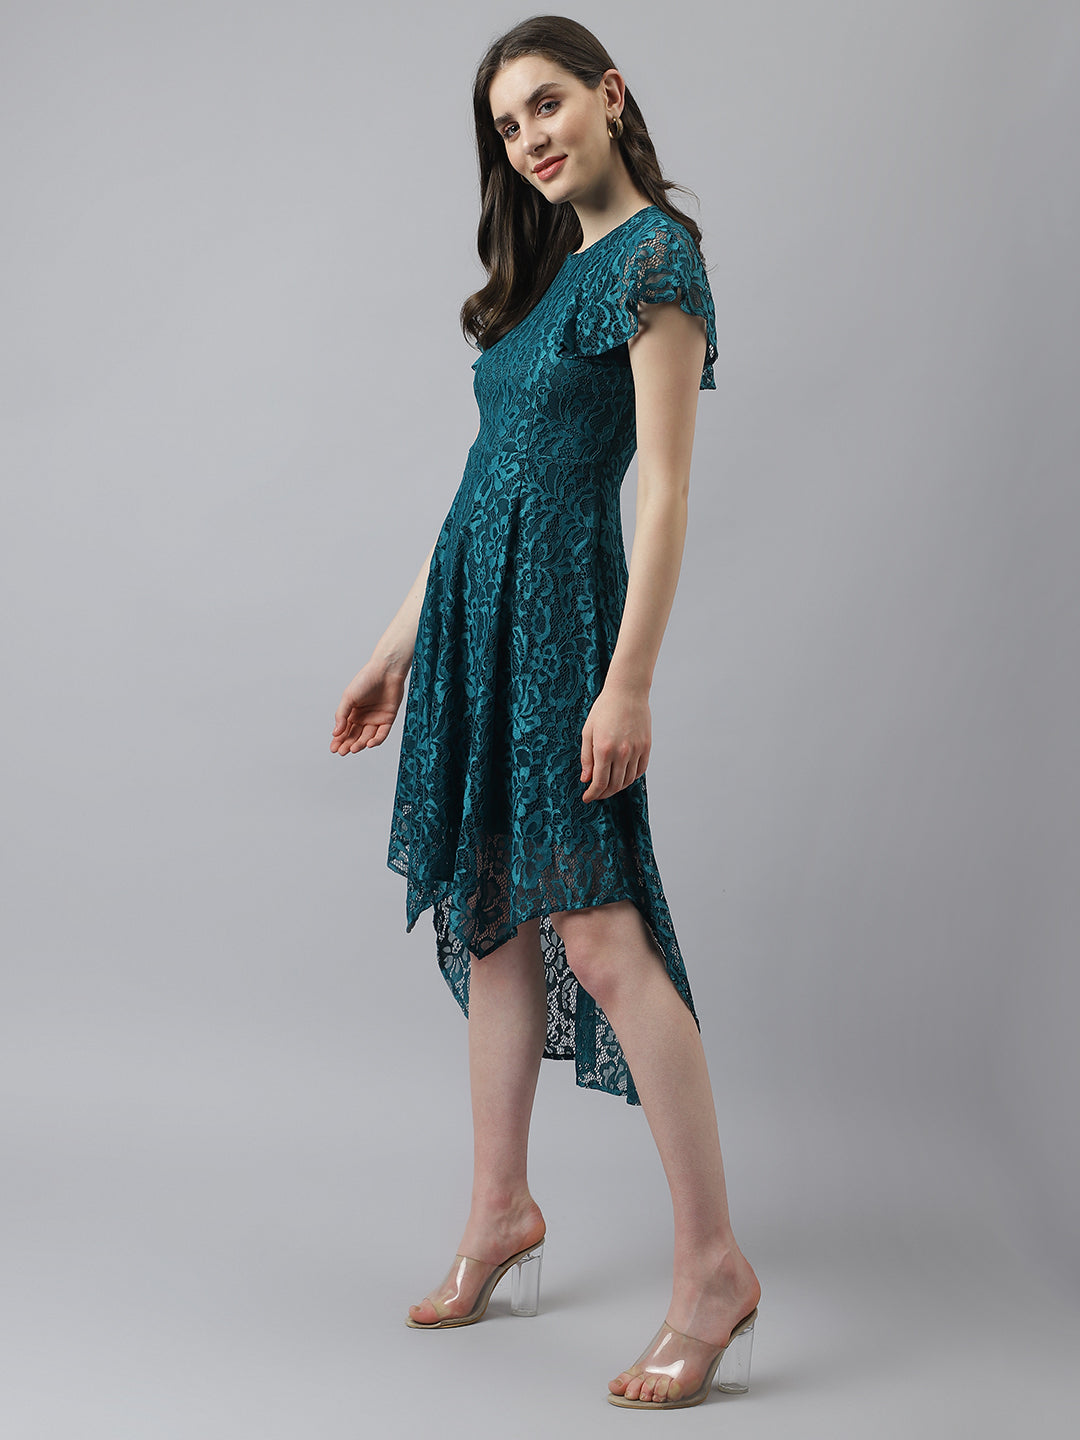 Teal Hig Low Lace Dress